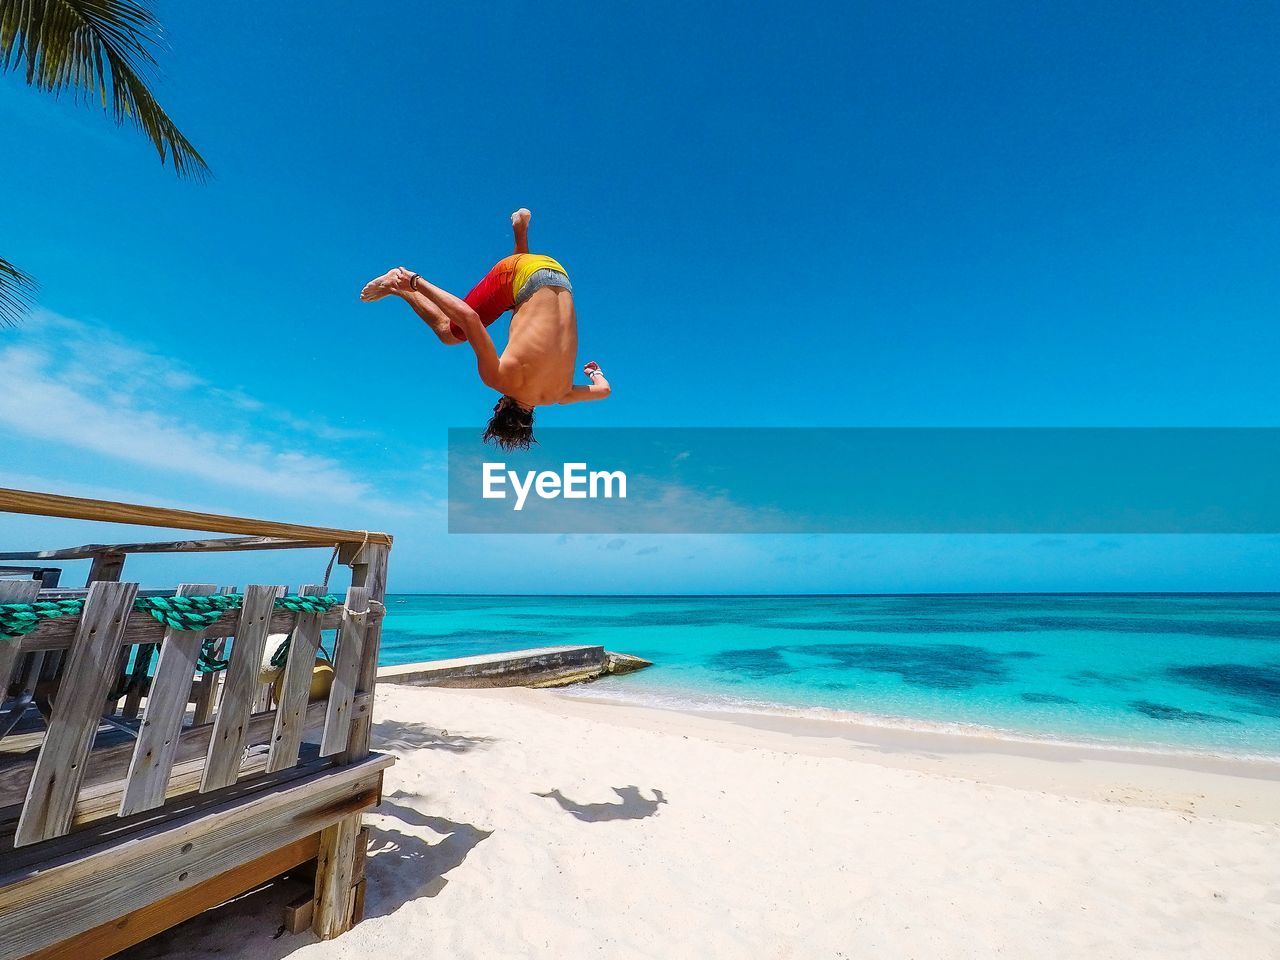 REAR VIEW OF MAN JUMPING AT BEACH AGAINST BLUE SKY